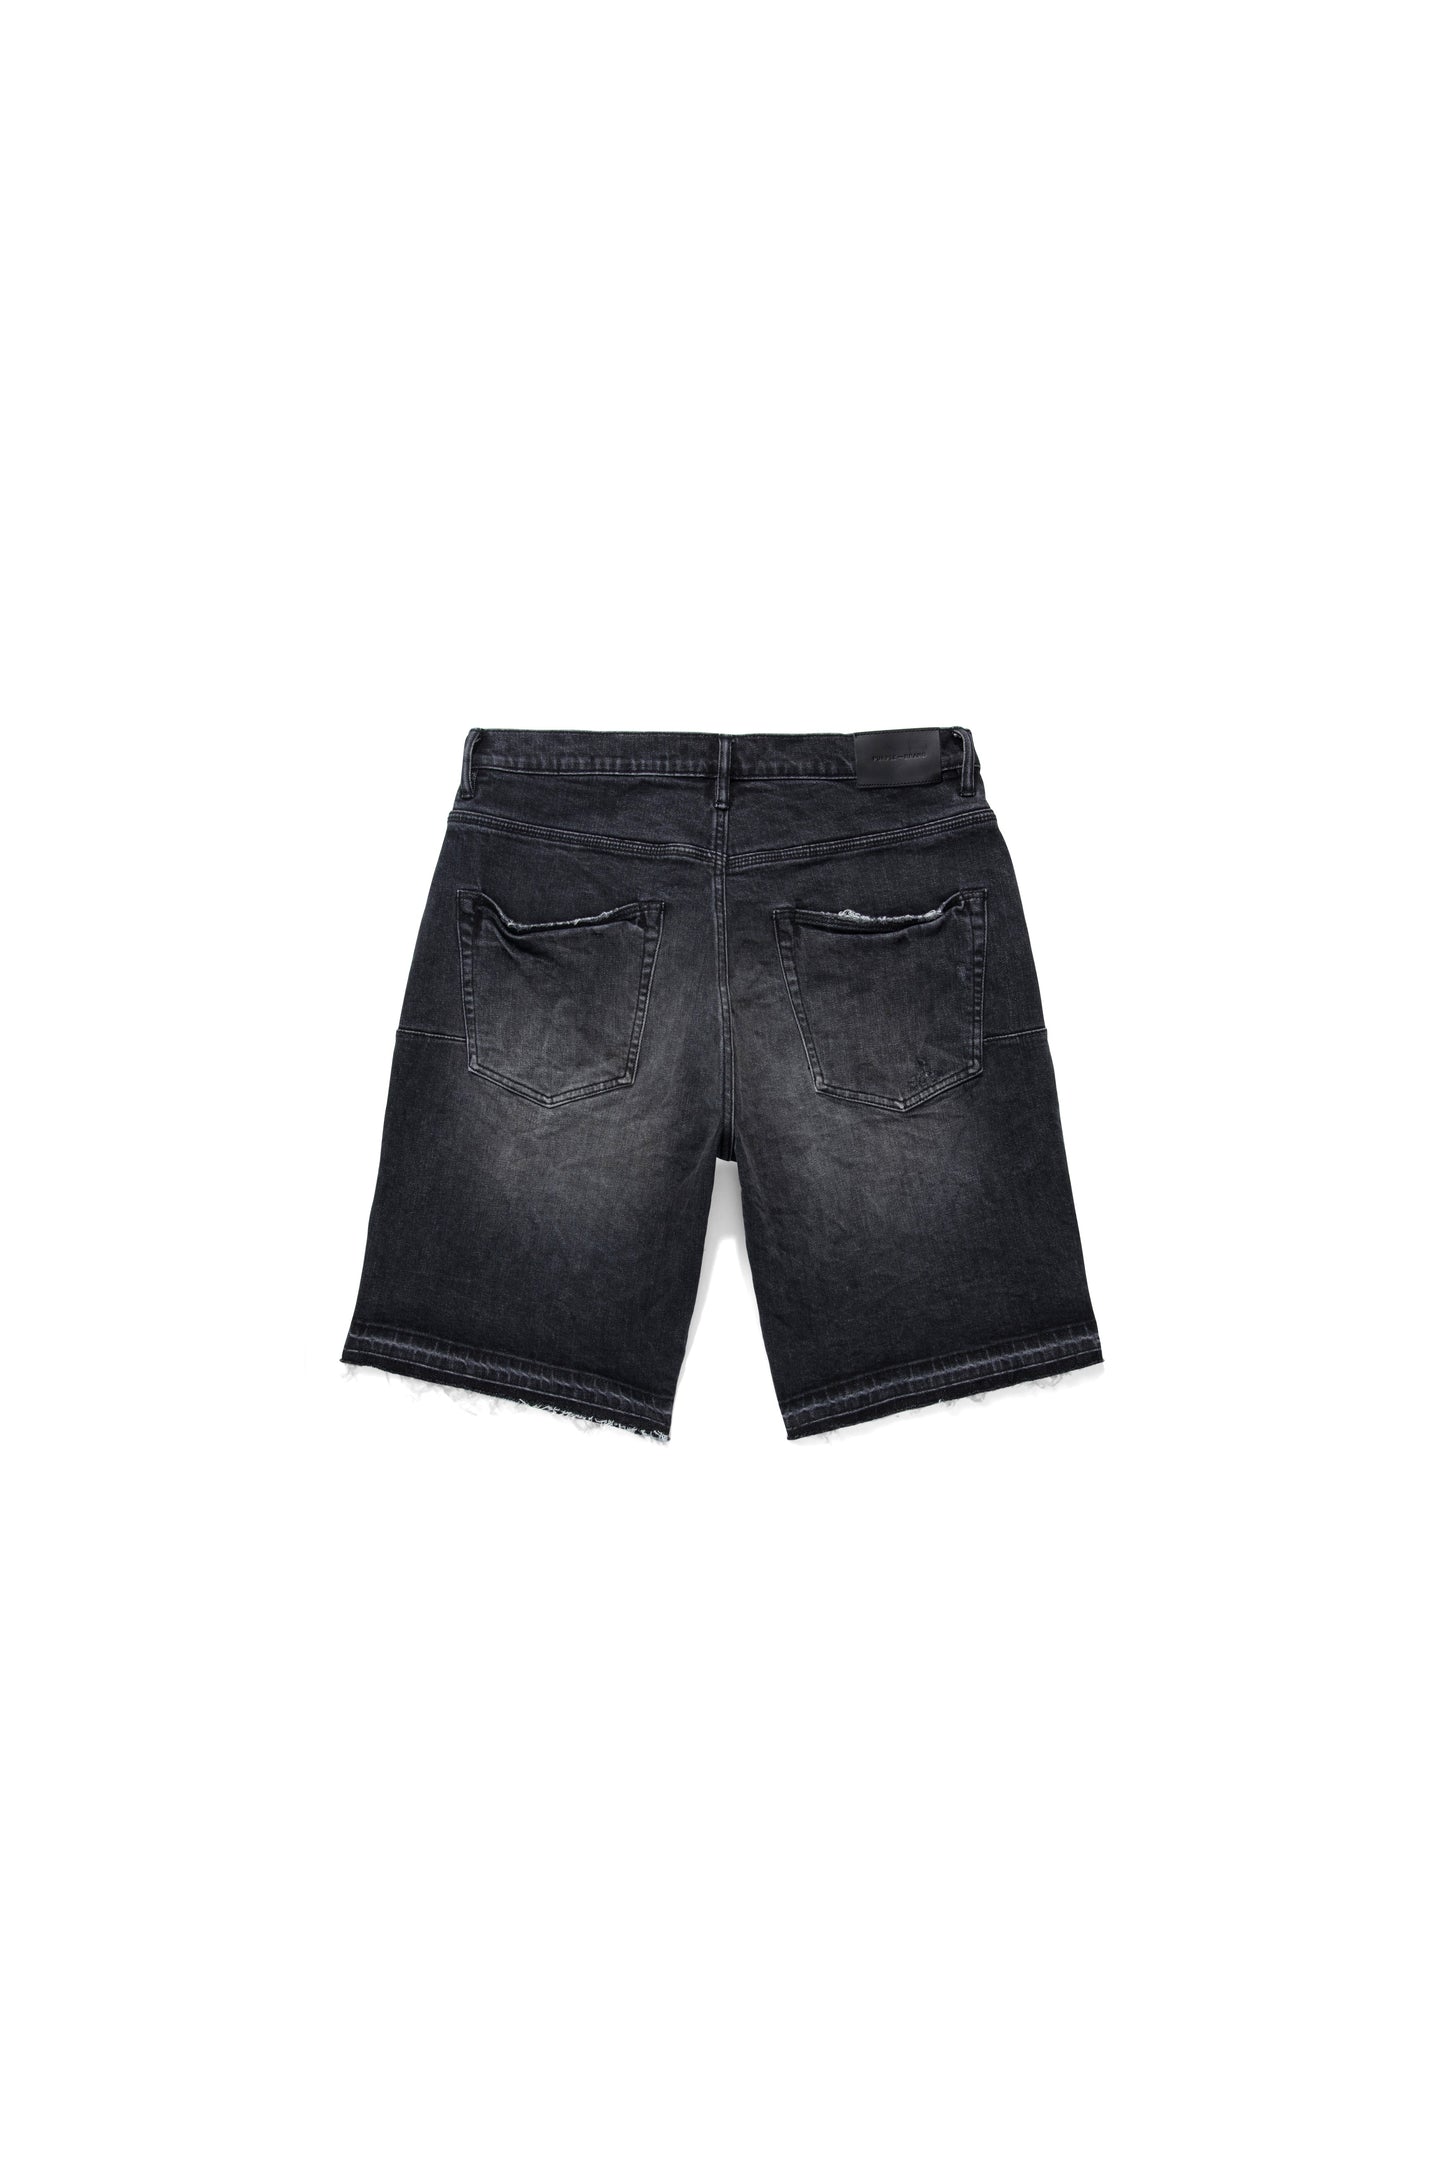 P021 RELAXED FIT SHORT - Black Blowout Relaxed Shorts